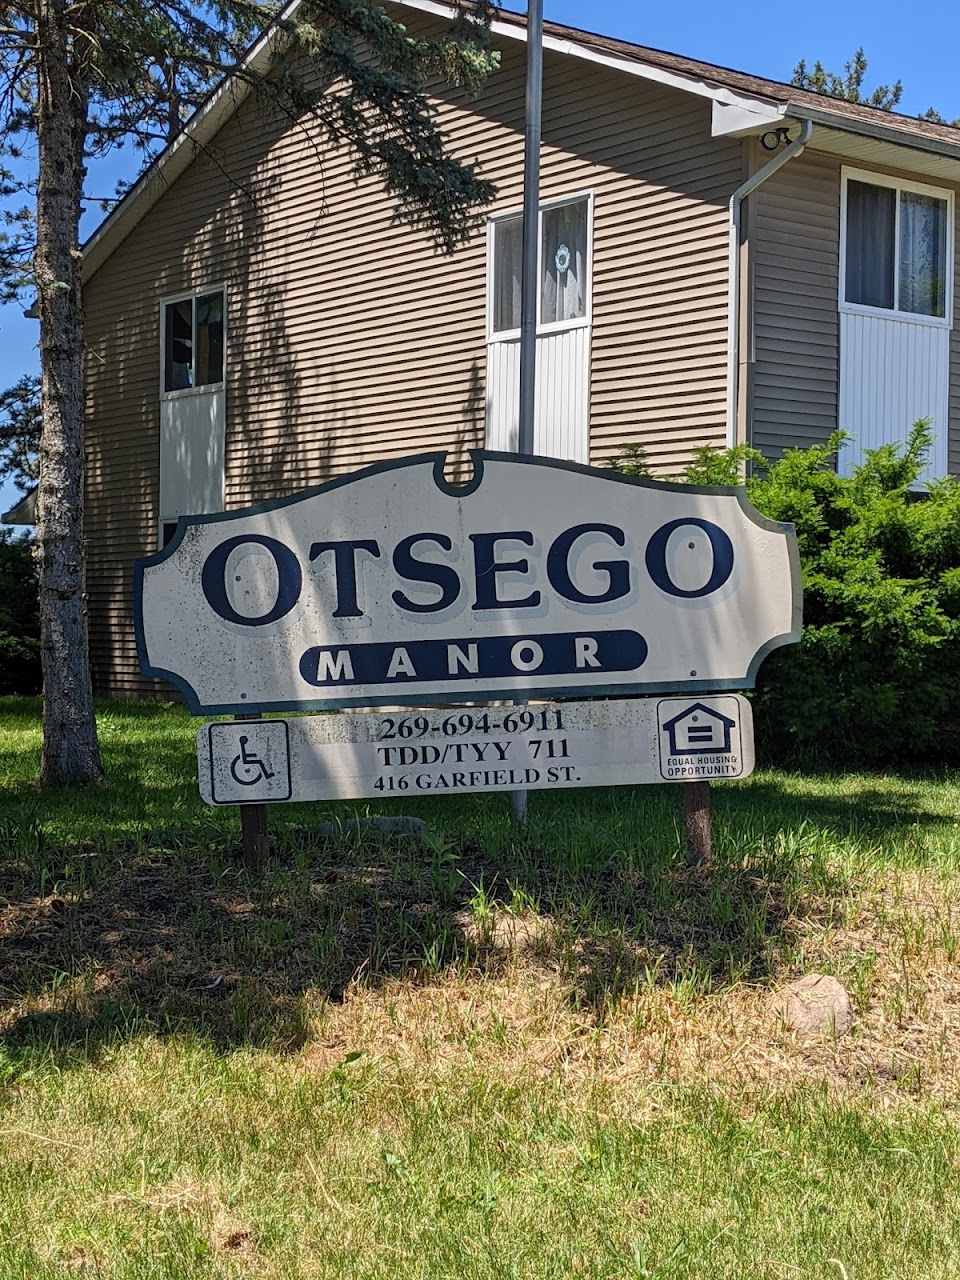 Photo of OTSEGO MANOR. Affordable housing located at 414 GARFIELD ST OTSEGO, MI 49078